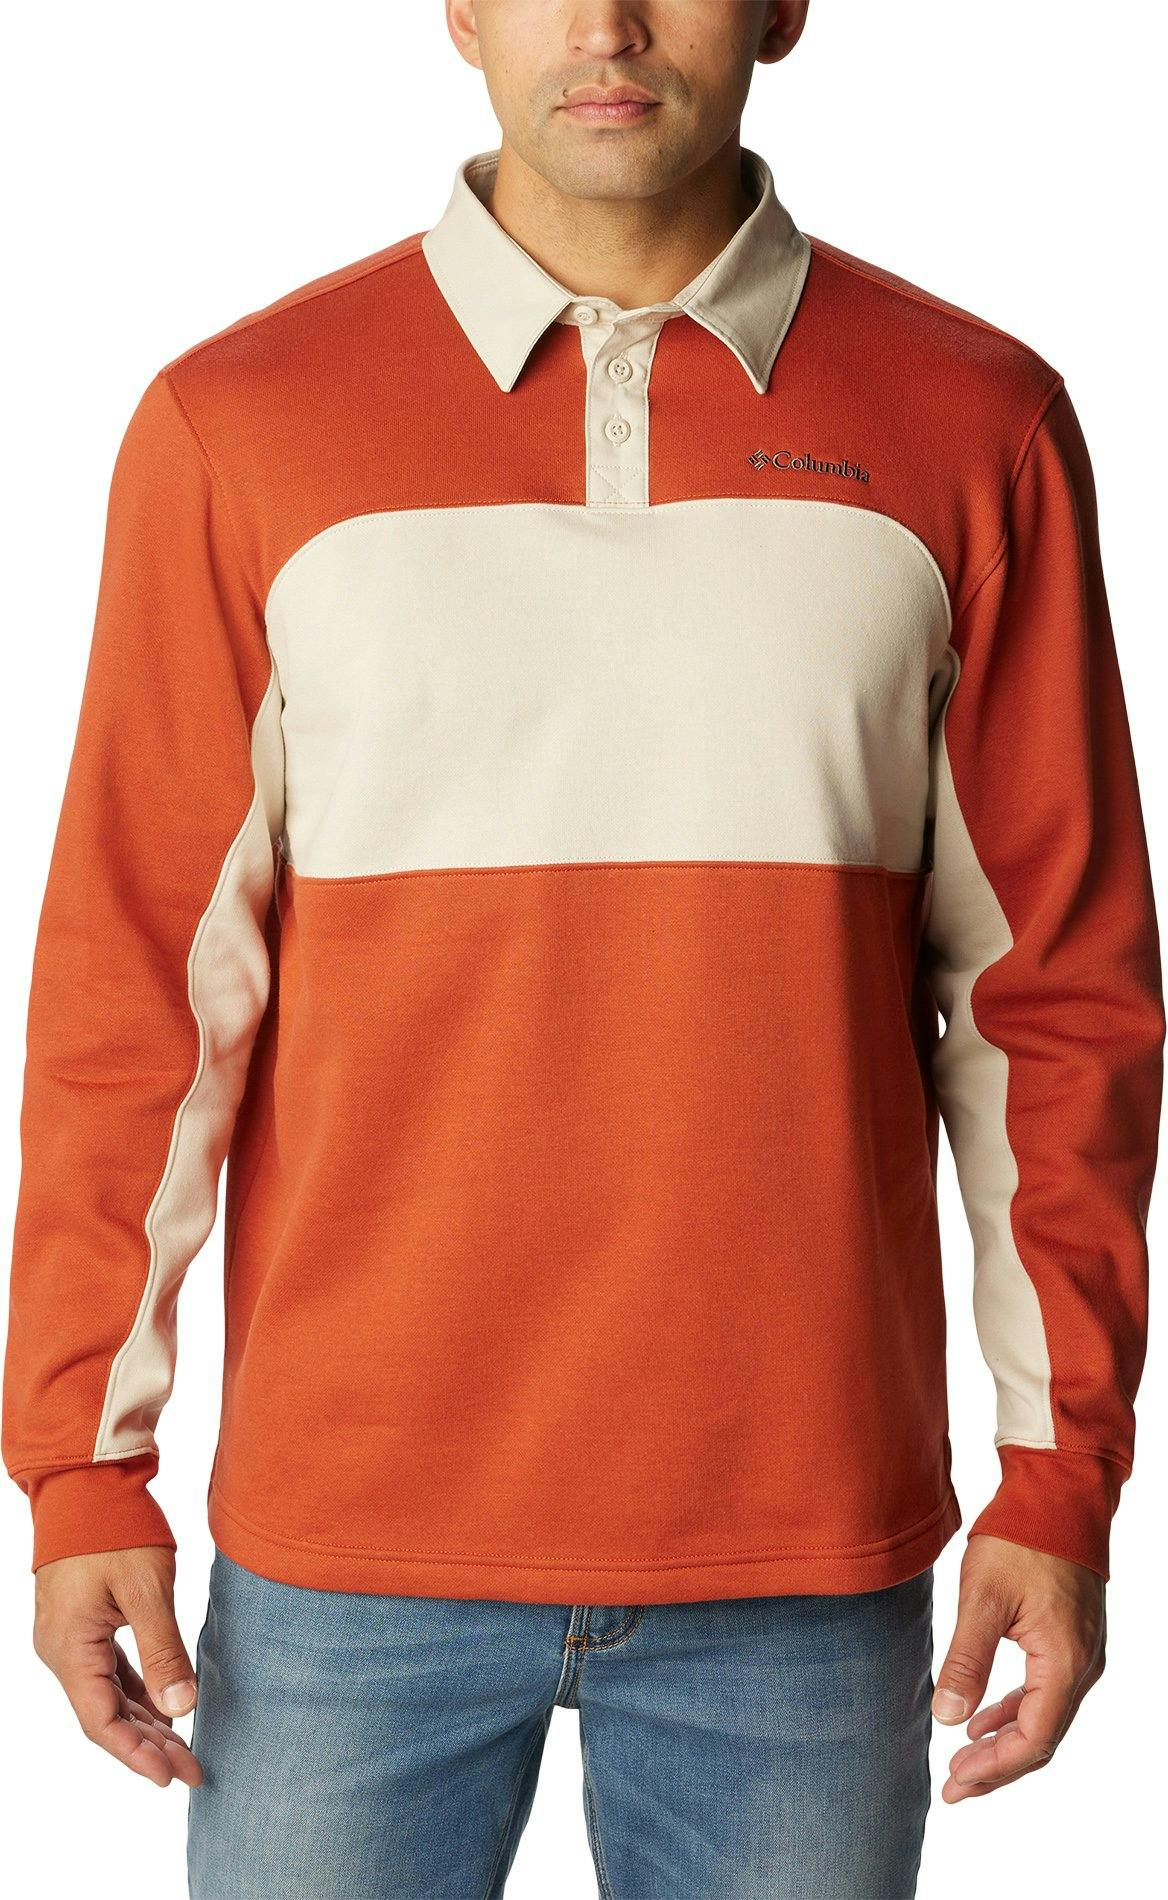 Product image for Columbia Trek Long Sleeve Rugby Shirt - Men's